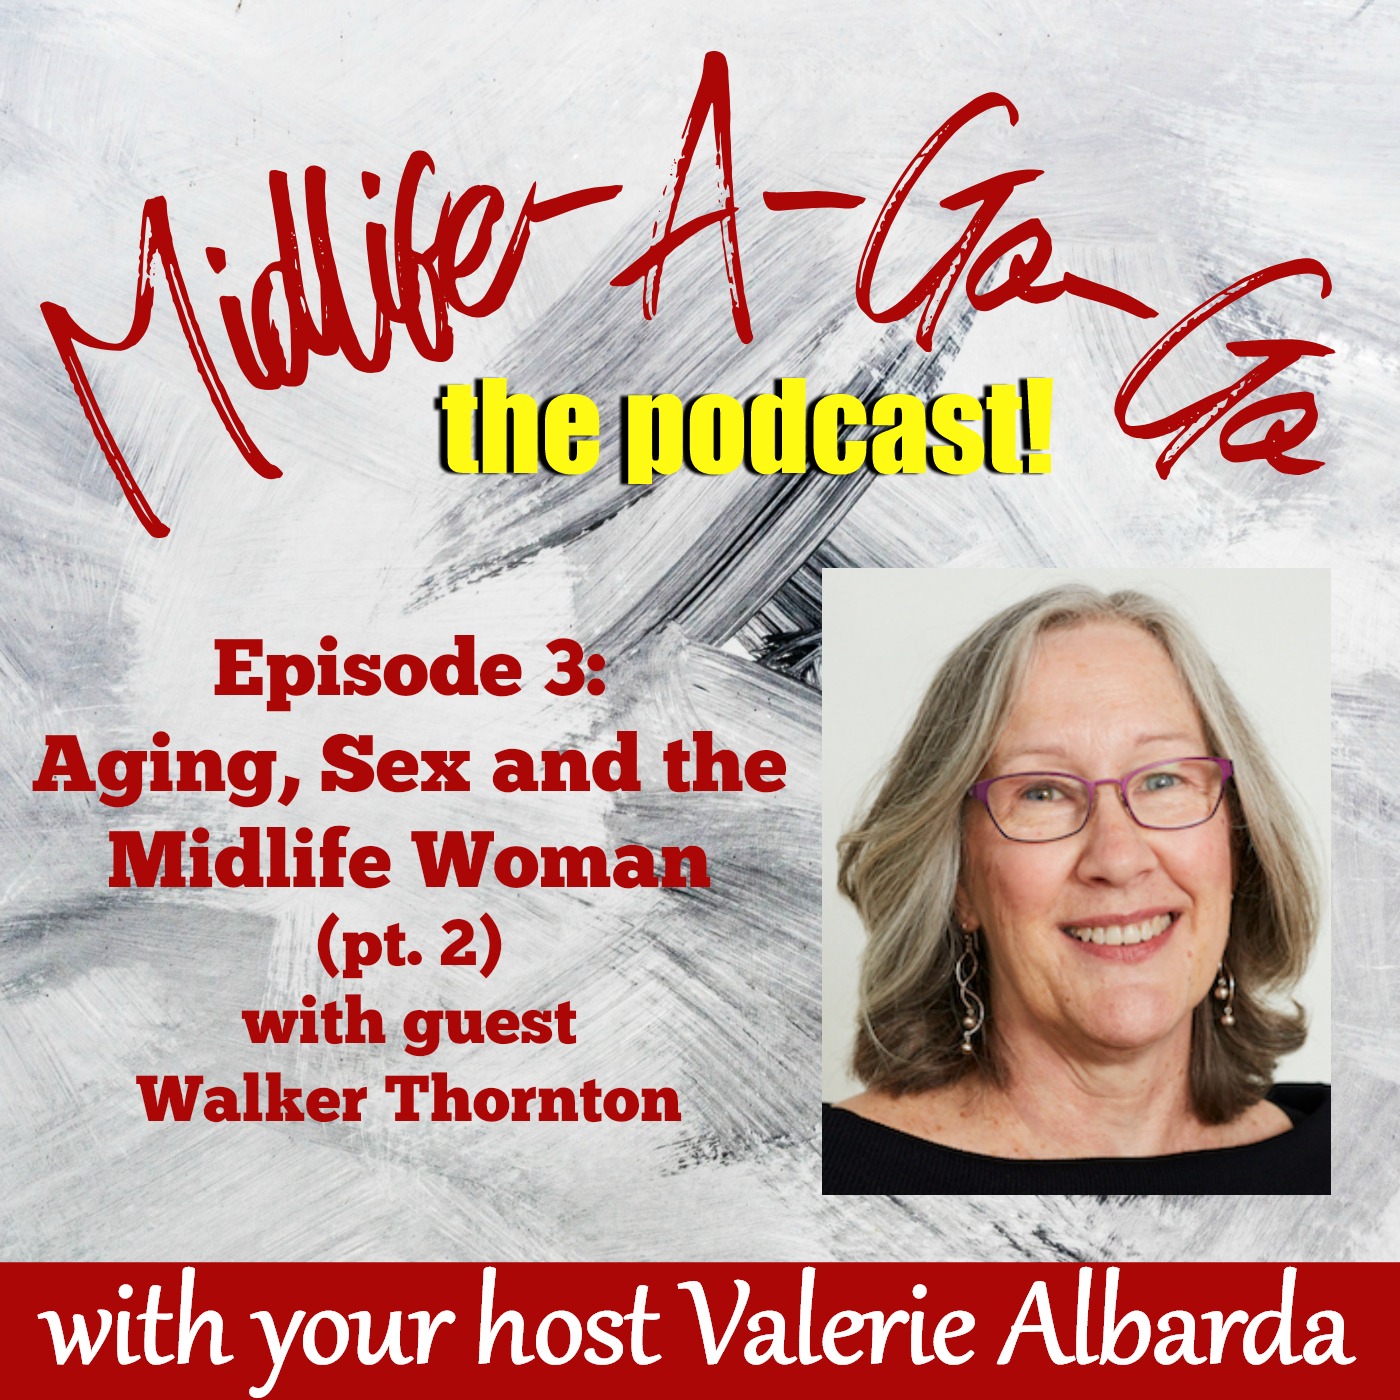 Ep. 3: Aging, Sex and the Women of Midlife with Walker Thornton pt. 2